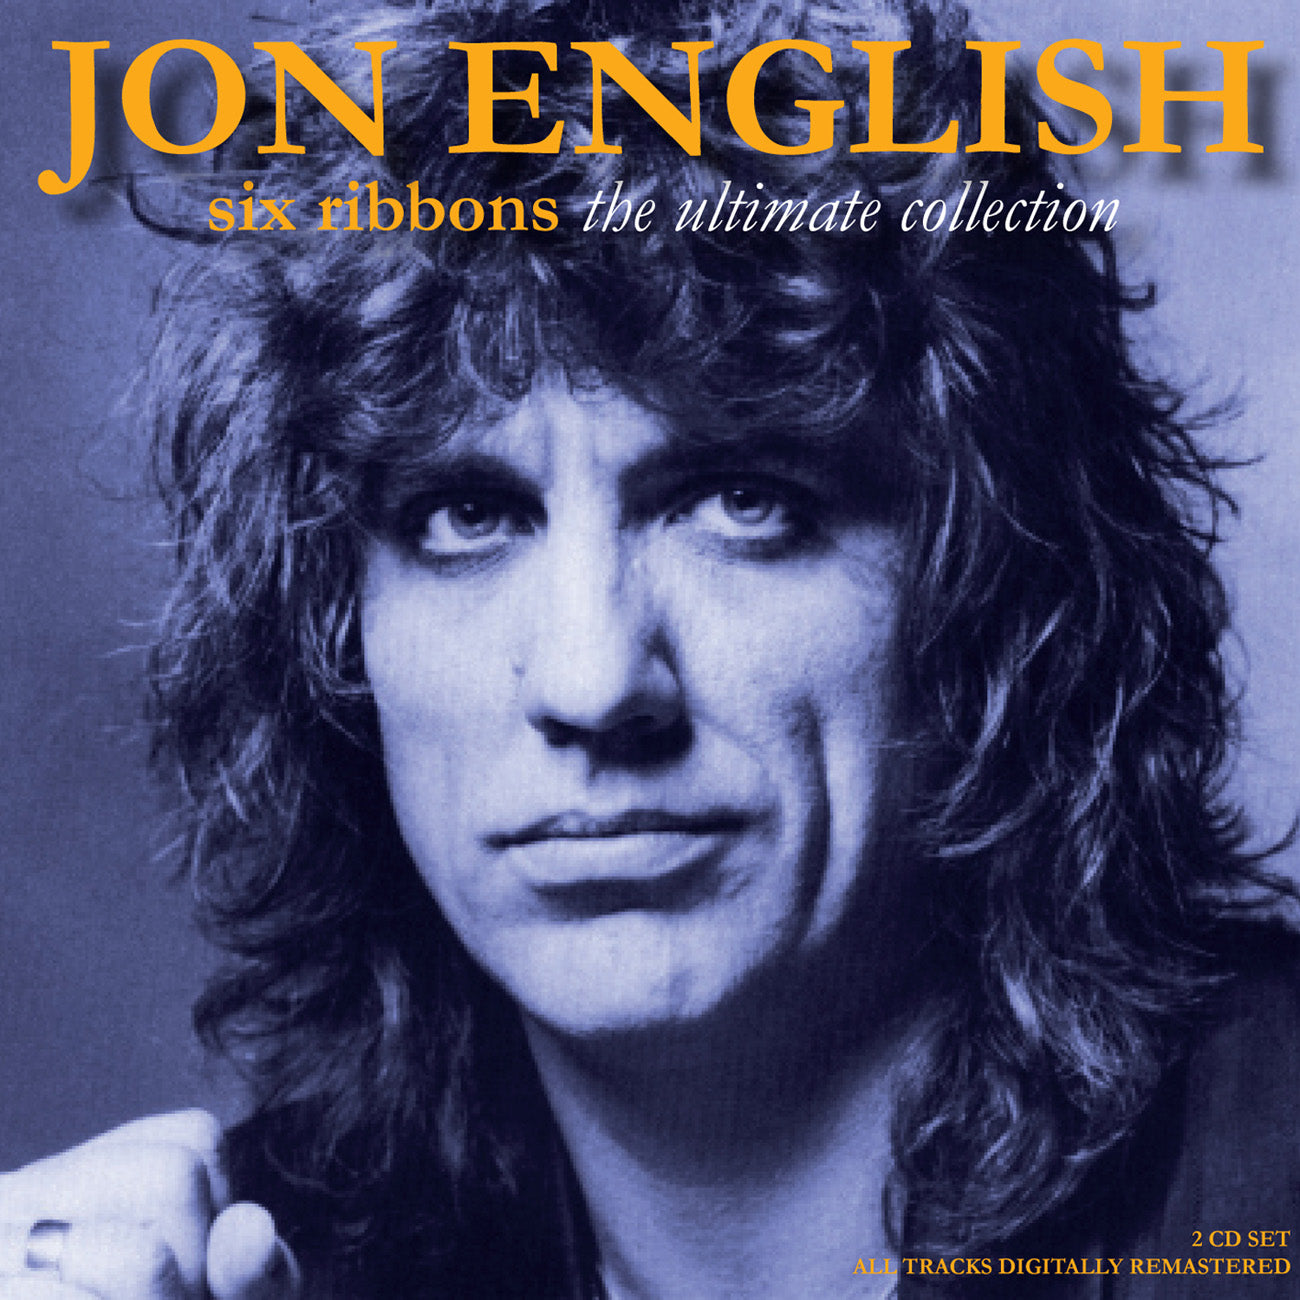 JON ENGLISH - SIX RIBBONS (THE ULTIMATE COLLECTION) 2 CD